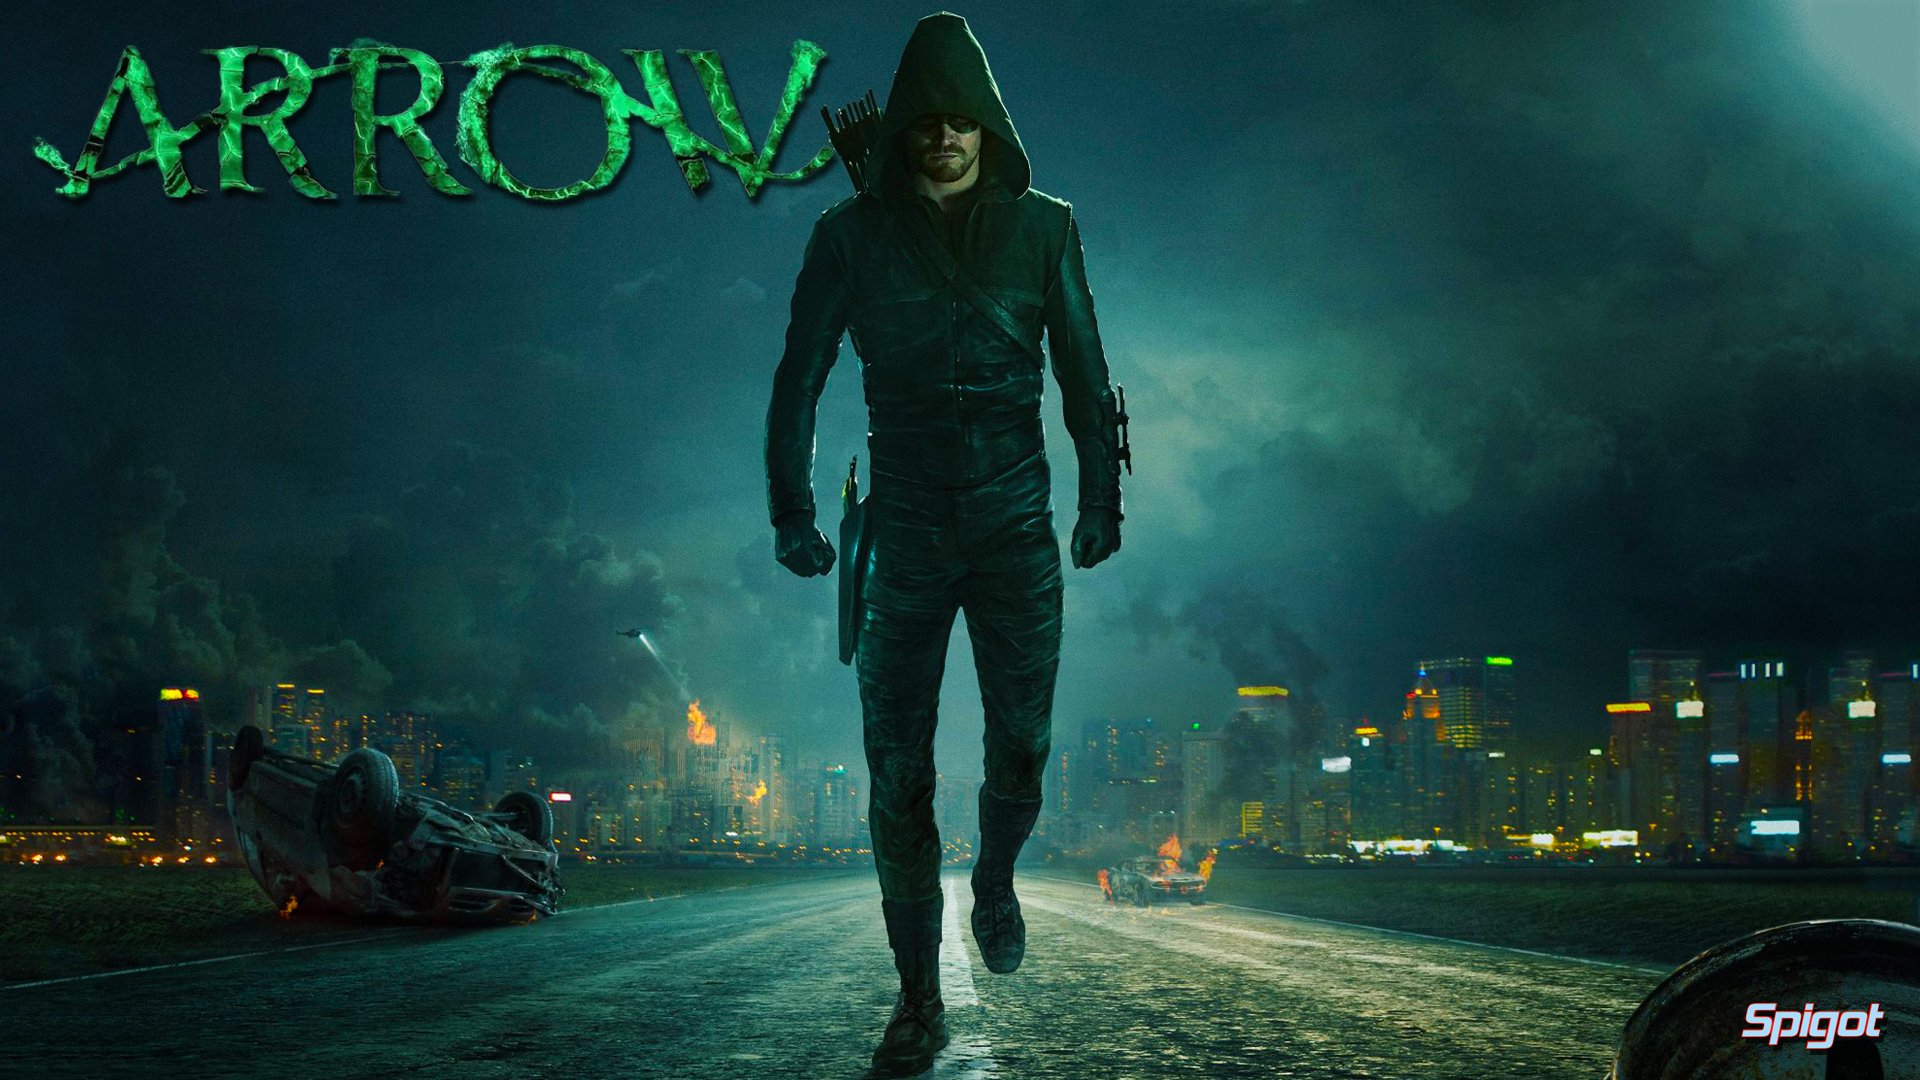  are a few new Arrow wallpapers I made looking forwarded to season 3 1920x1080